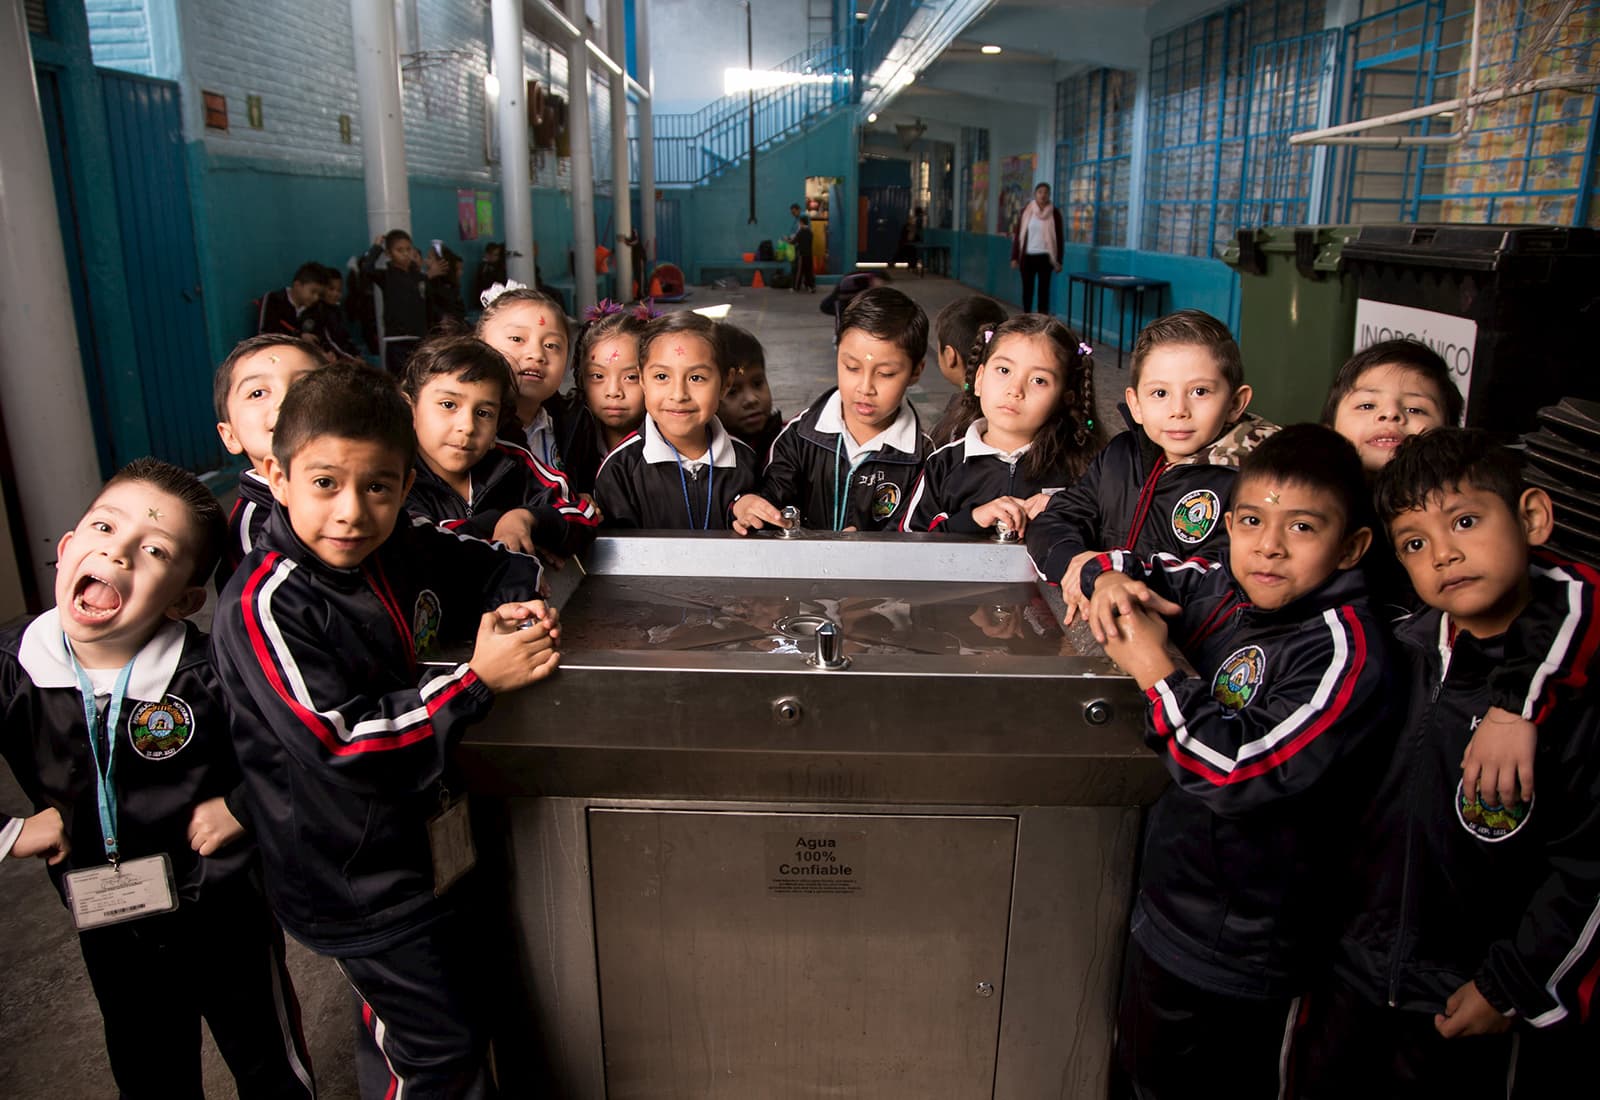 Students in Mexico City benefit from new water fountains thanks to Bloomberg Philanthropes efforts to reduce sugary beverage consumption.